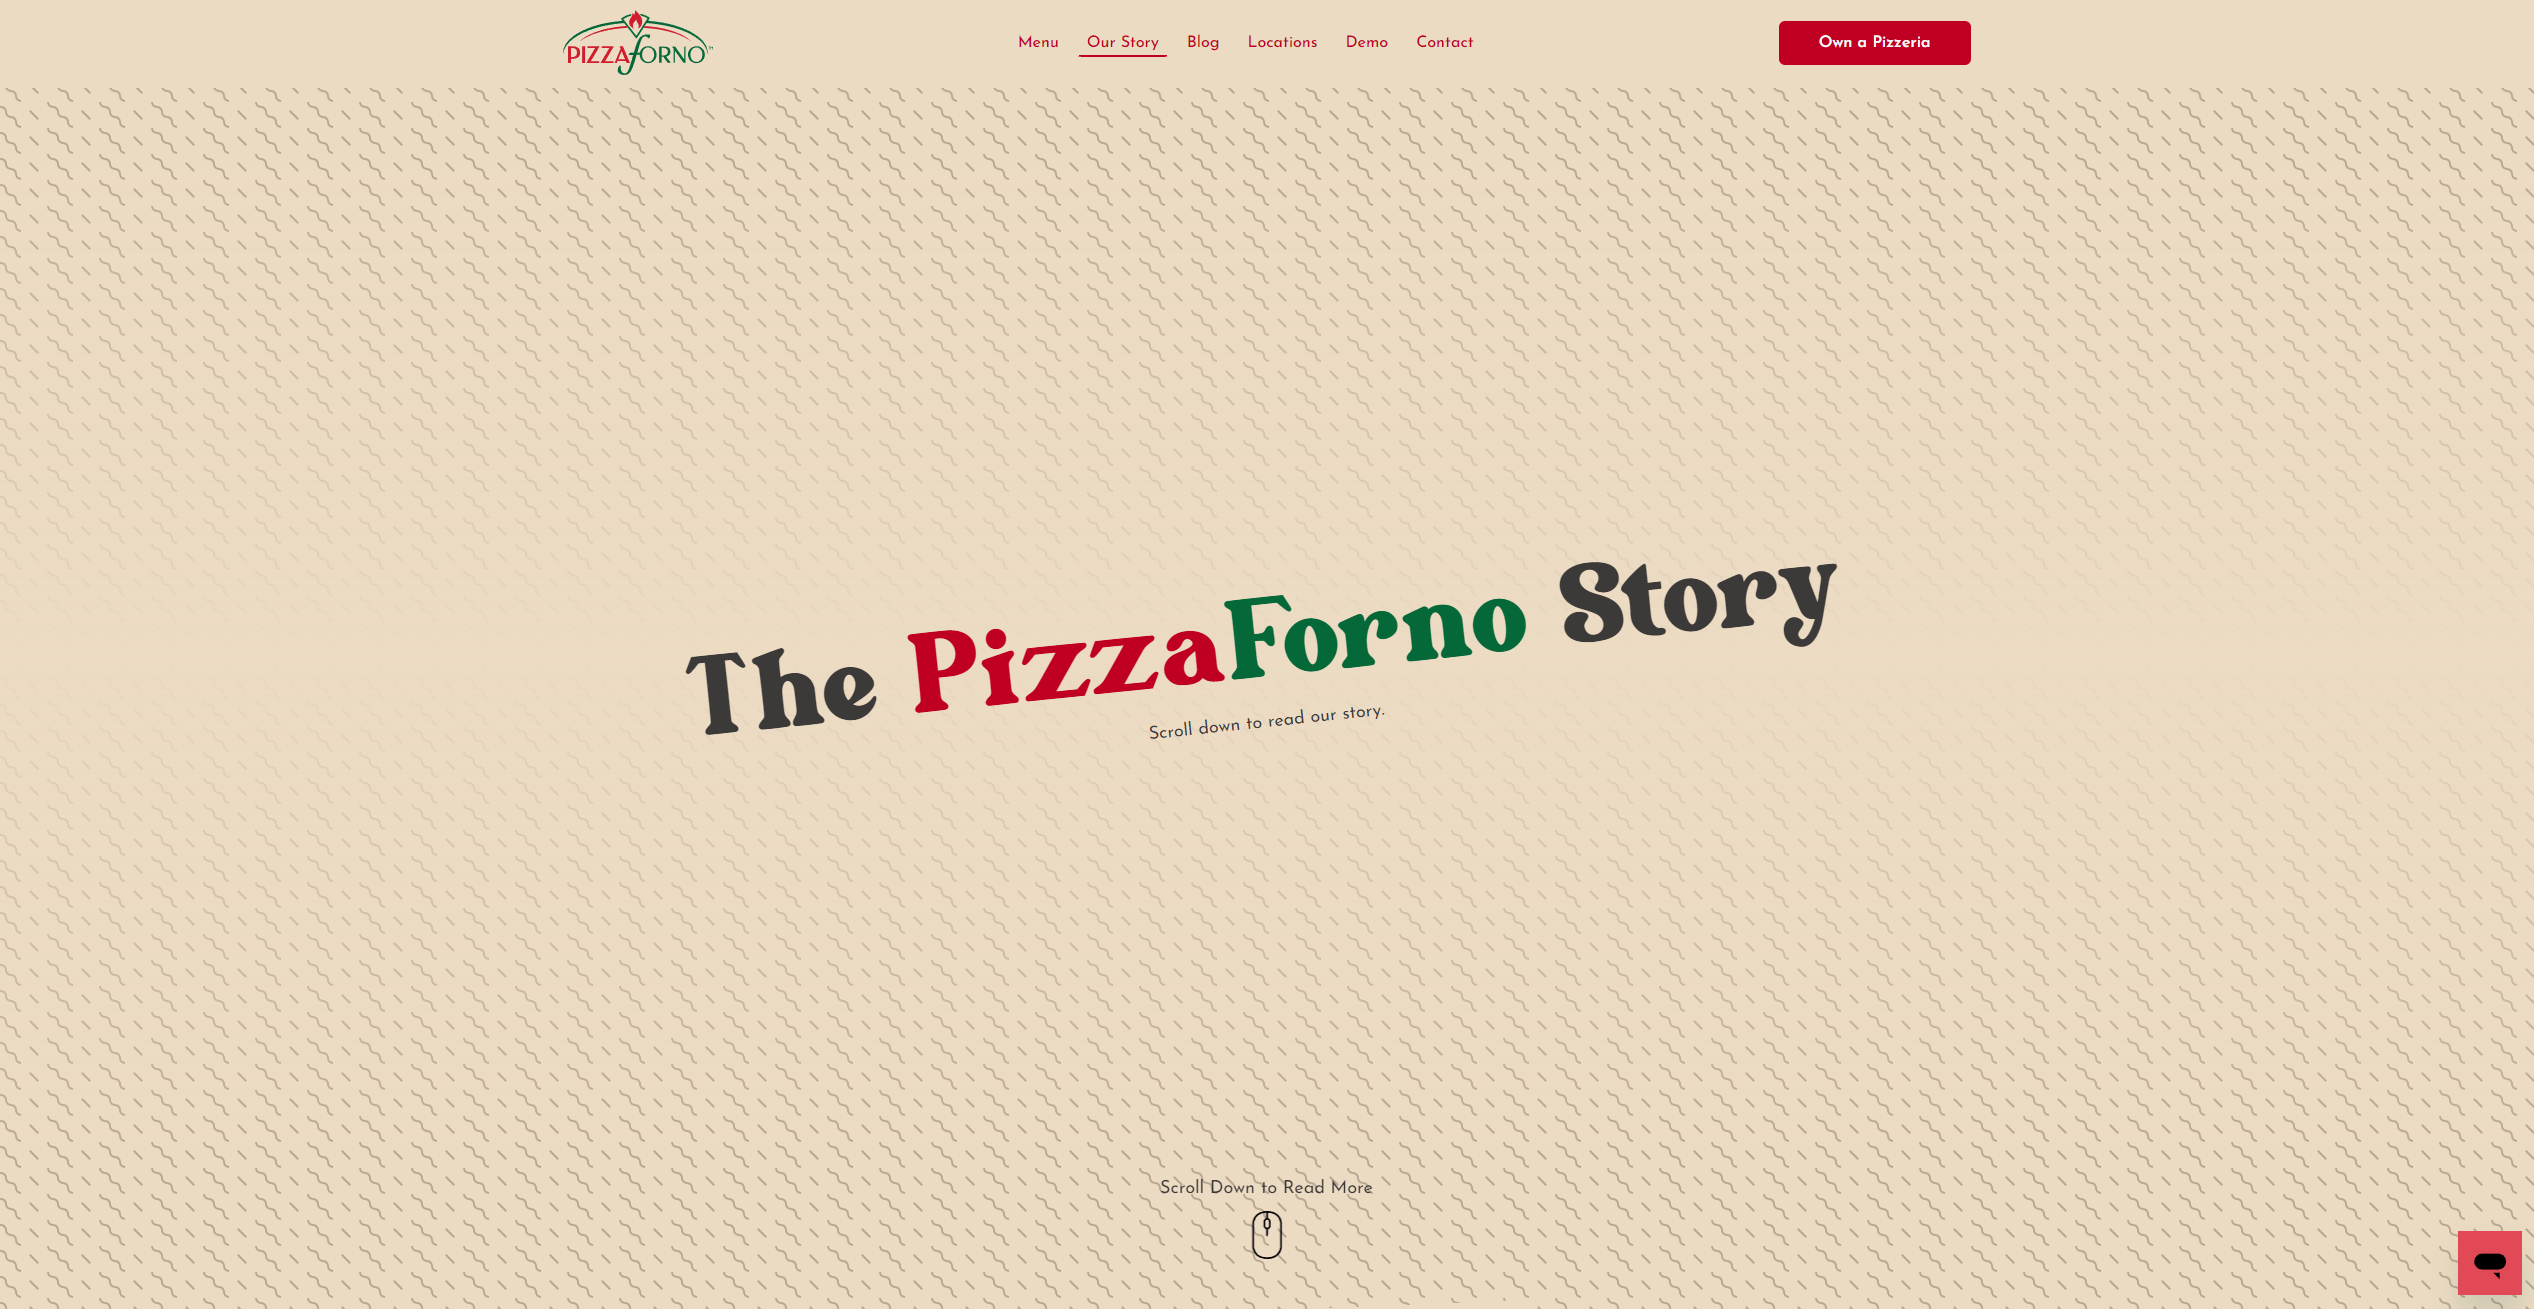 An image of the PizzaForno about us page